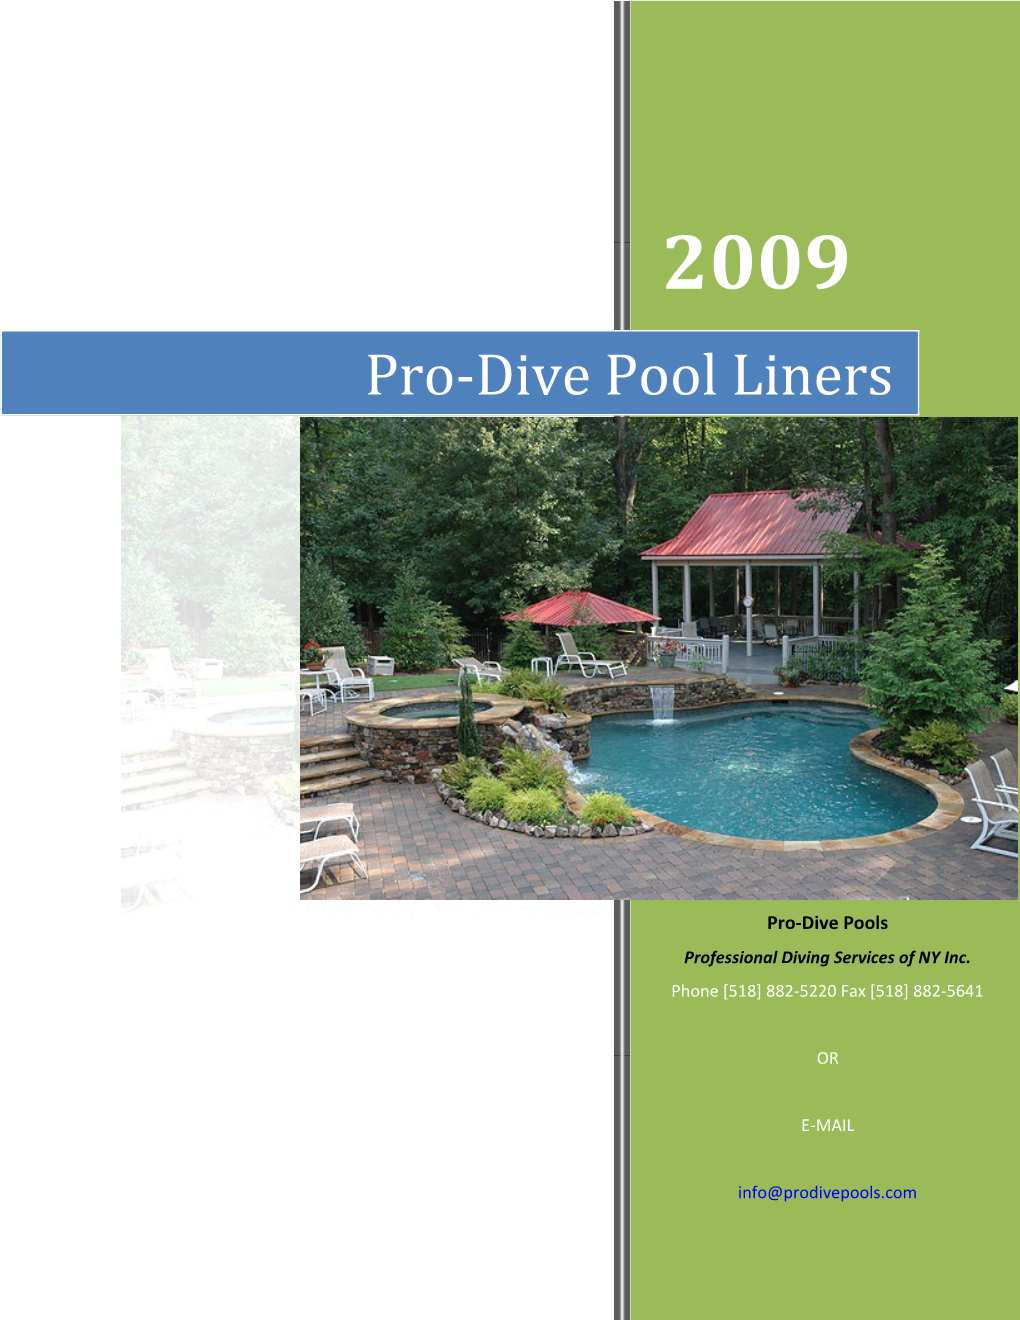 All Pool Liner Photos Copyrighted By